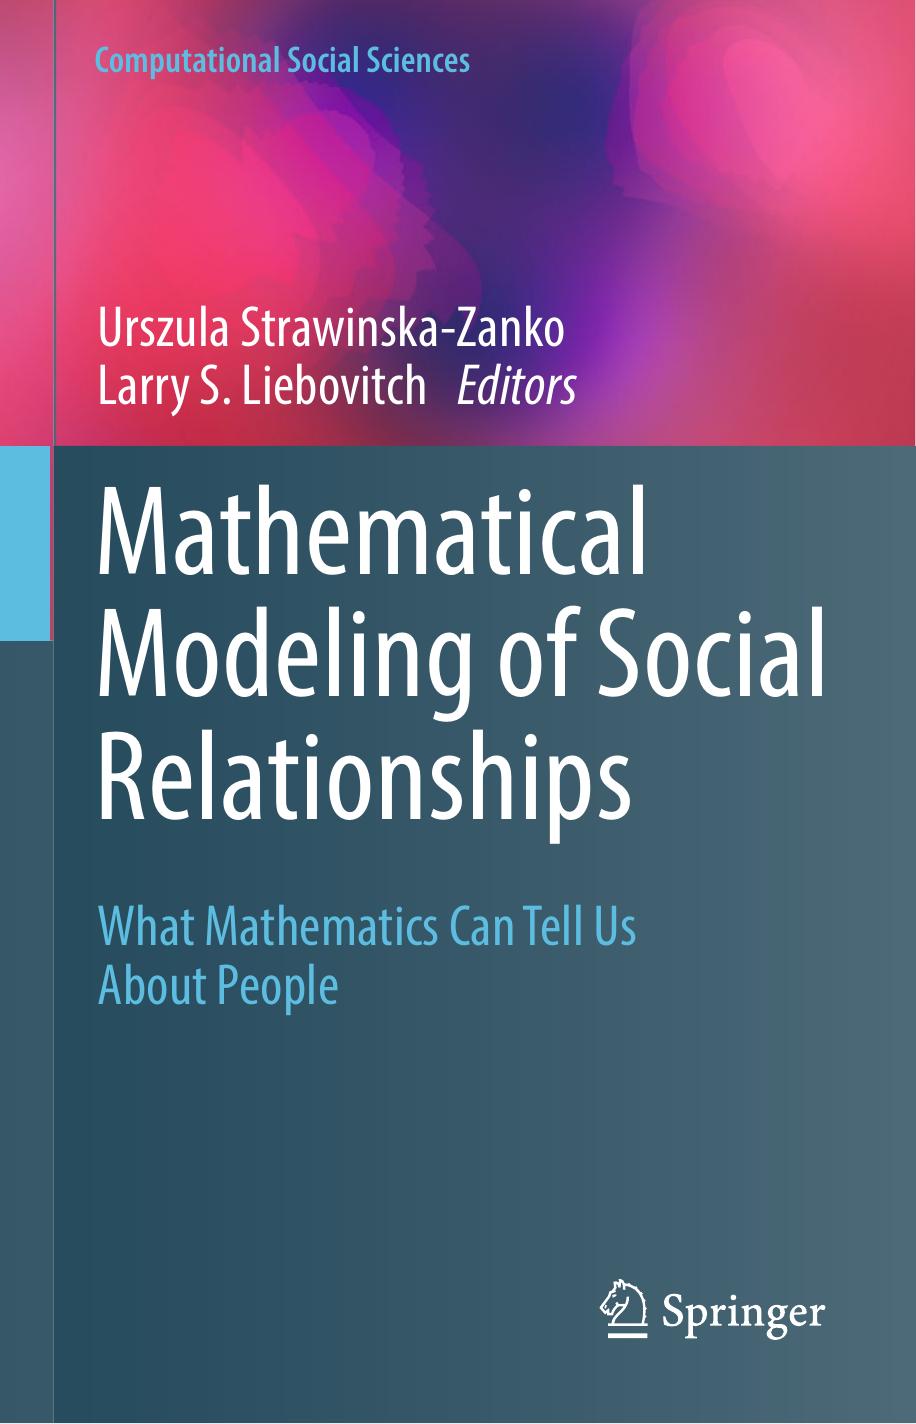 Mathematical Modeling of Social Relationships 2018